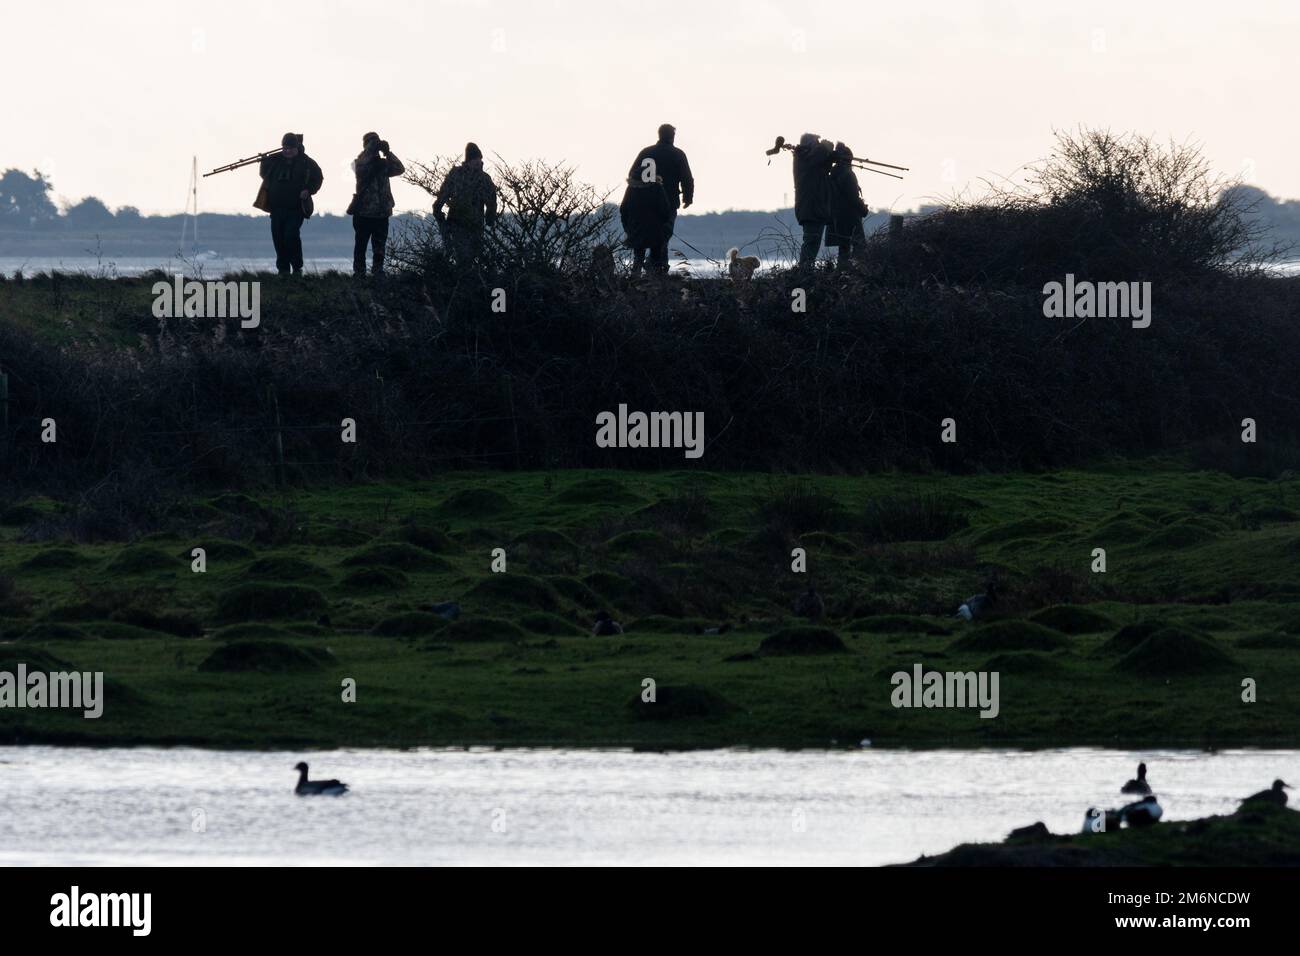 Group of birdwatchers silhouetted against the sky at Farlington Marshes Nature Reserve, Hampshire, England, UK. Healthy outdoor activity or hobby. Stock Photo